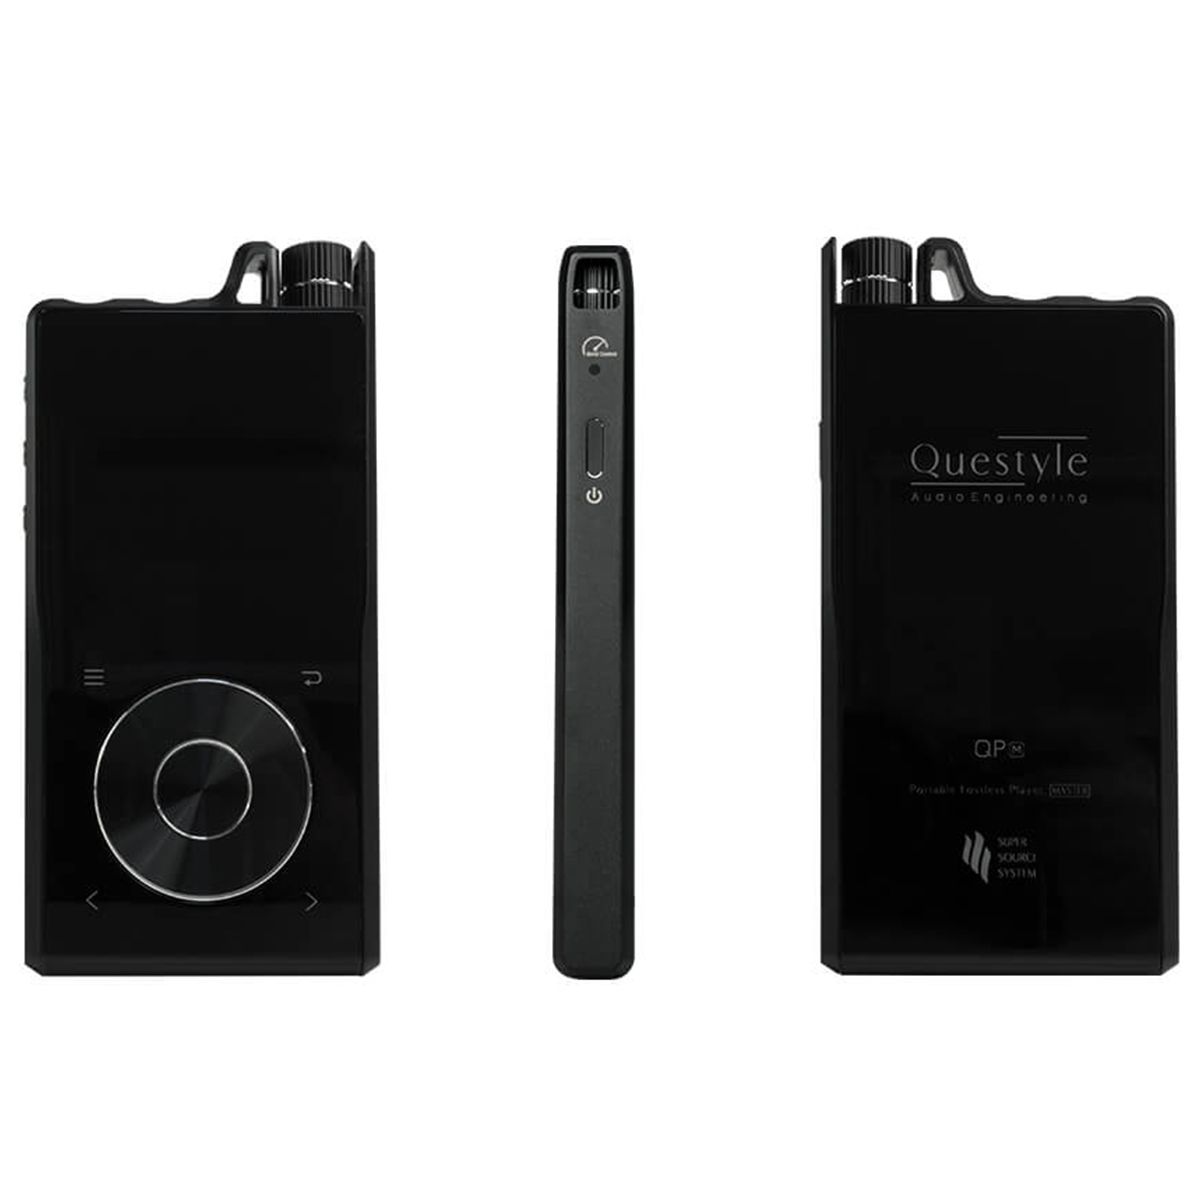 Questyle QPM Portable Music Player